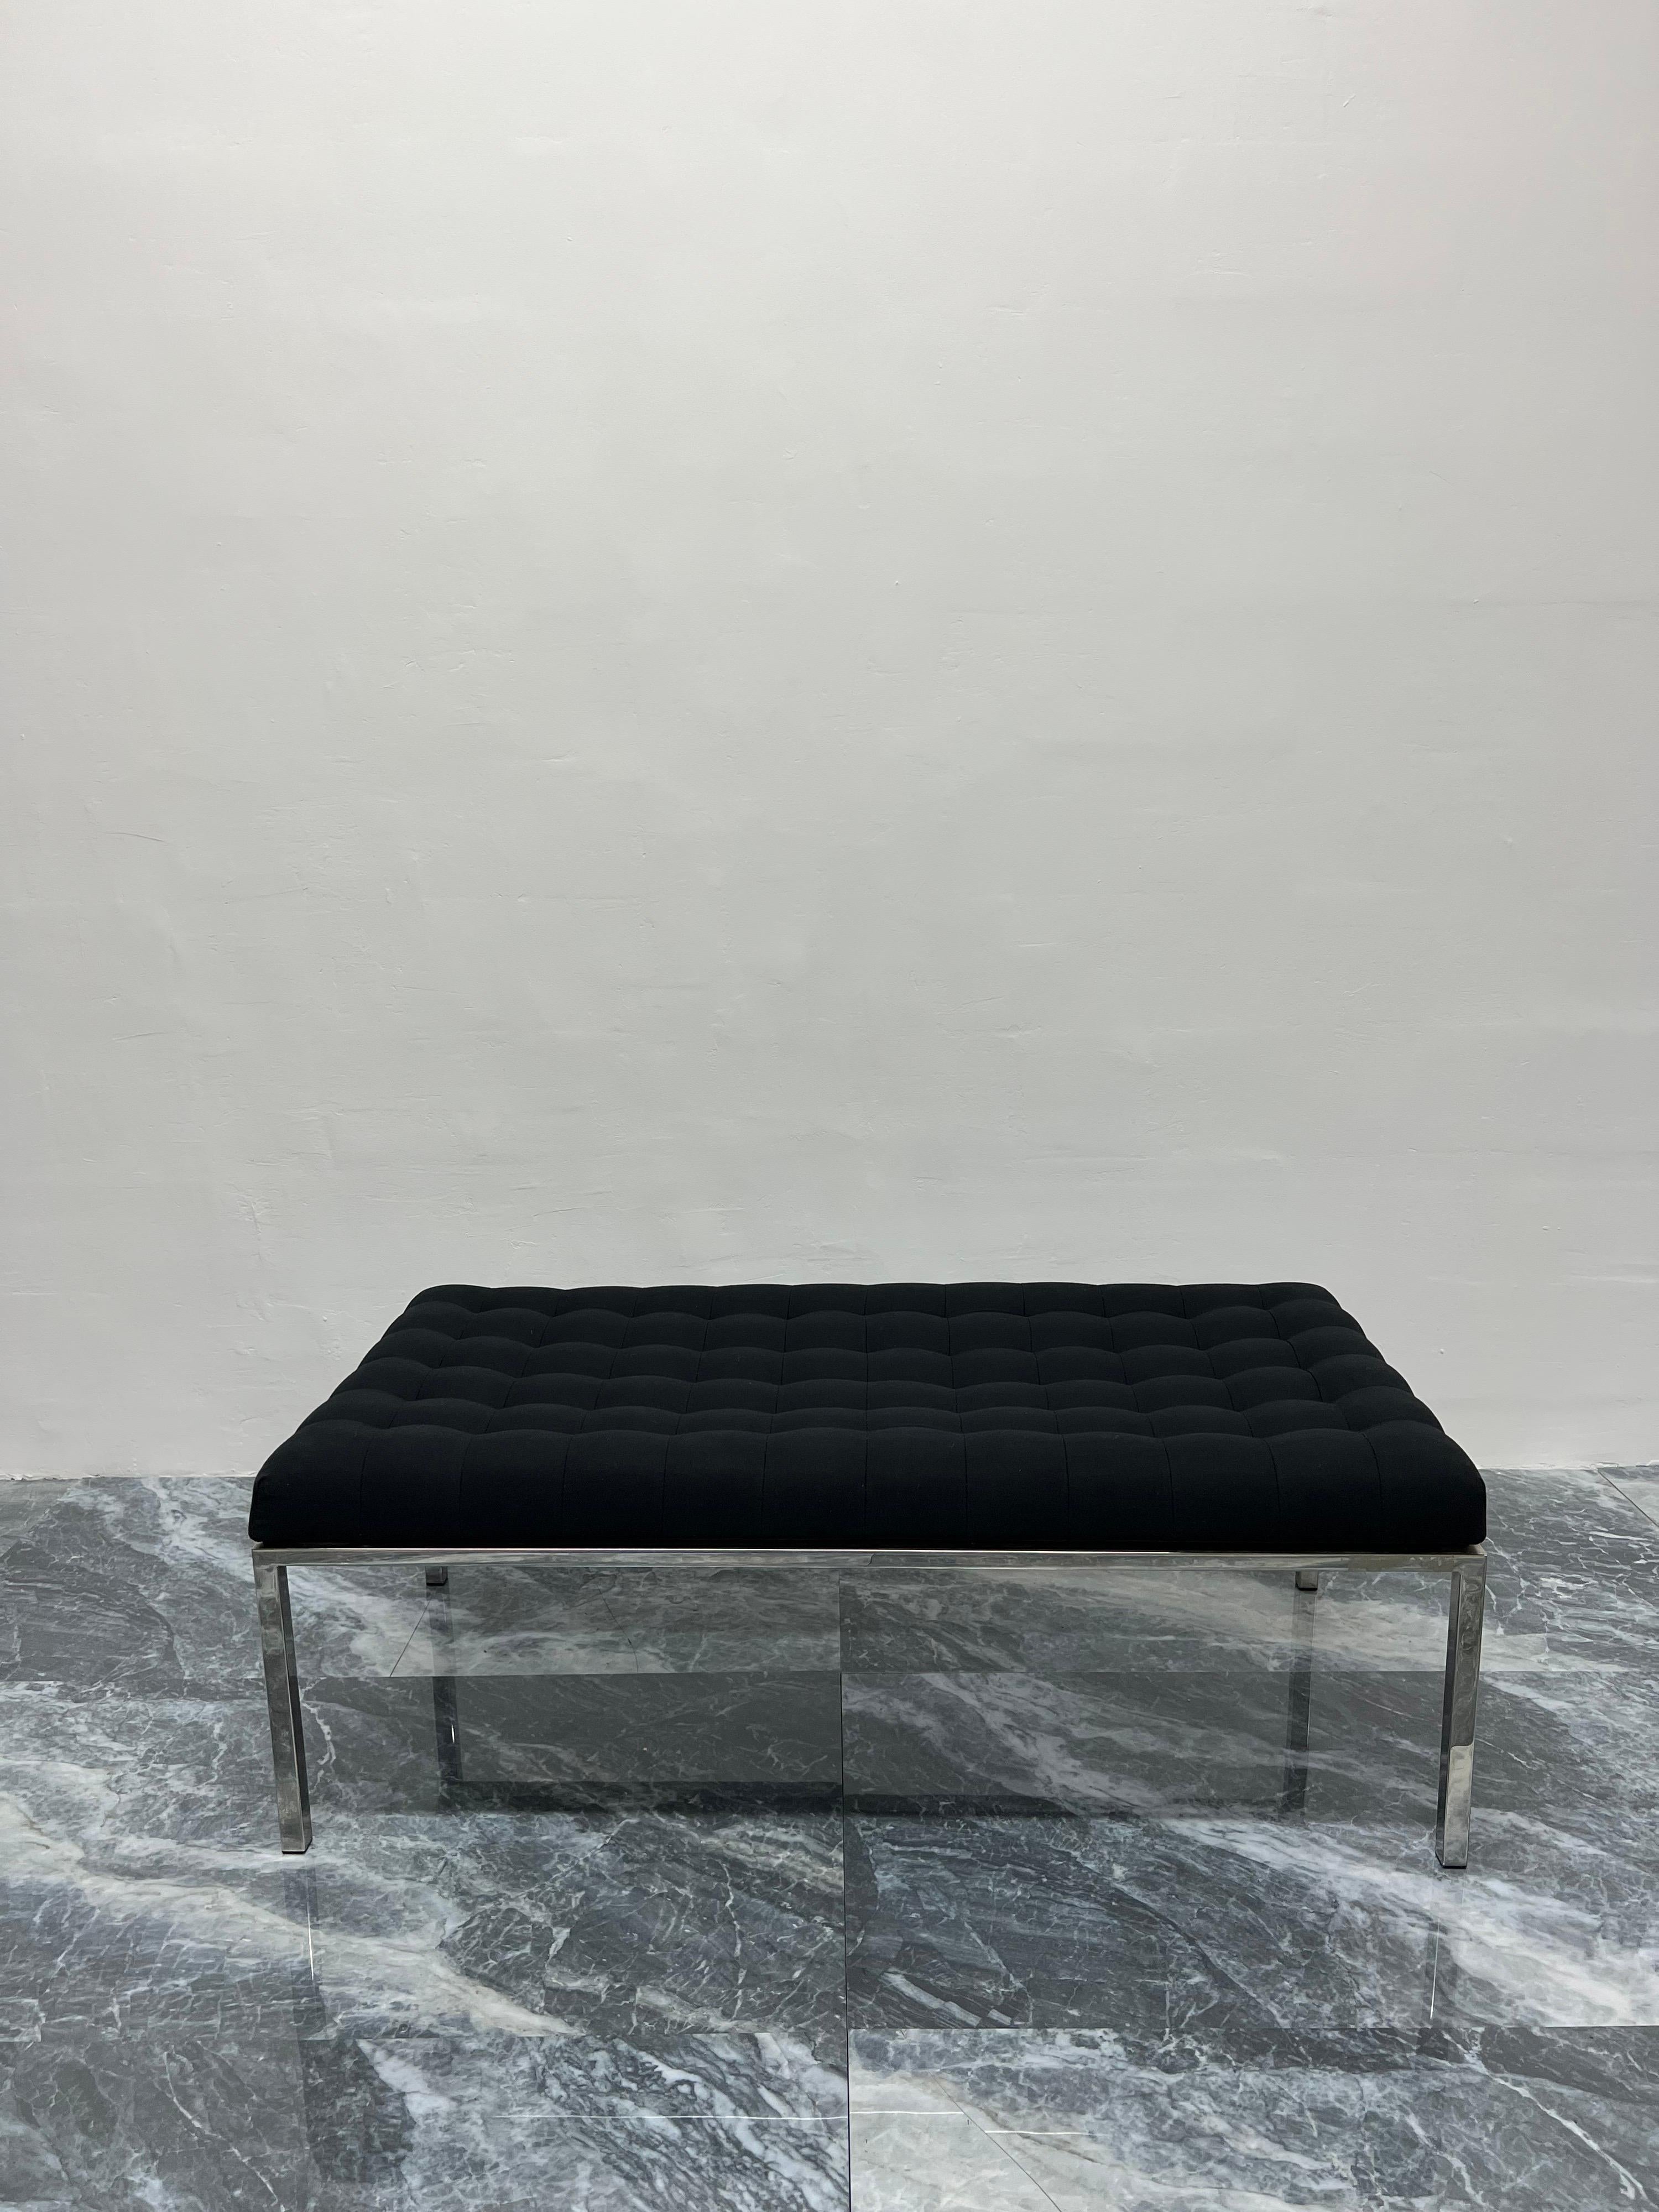 Black Tufted Canvas Museum Bench by Metropolitan Furniture, 1986 In Good Condition For Sale In Miami, FL